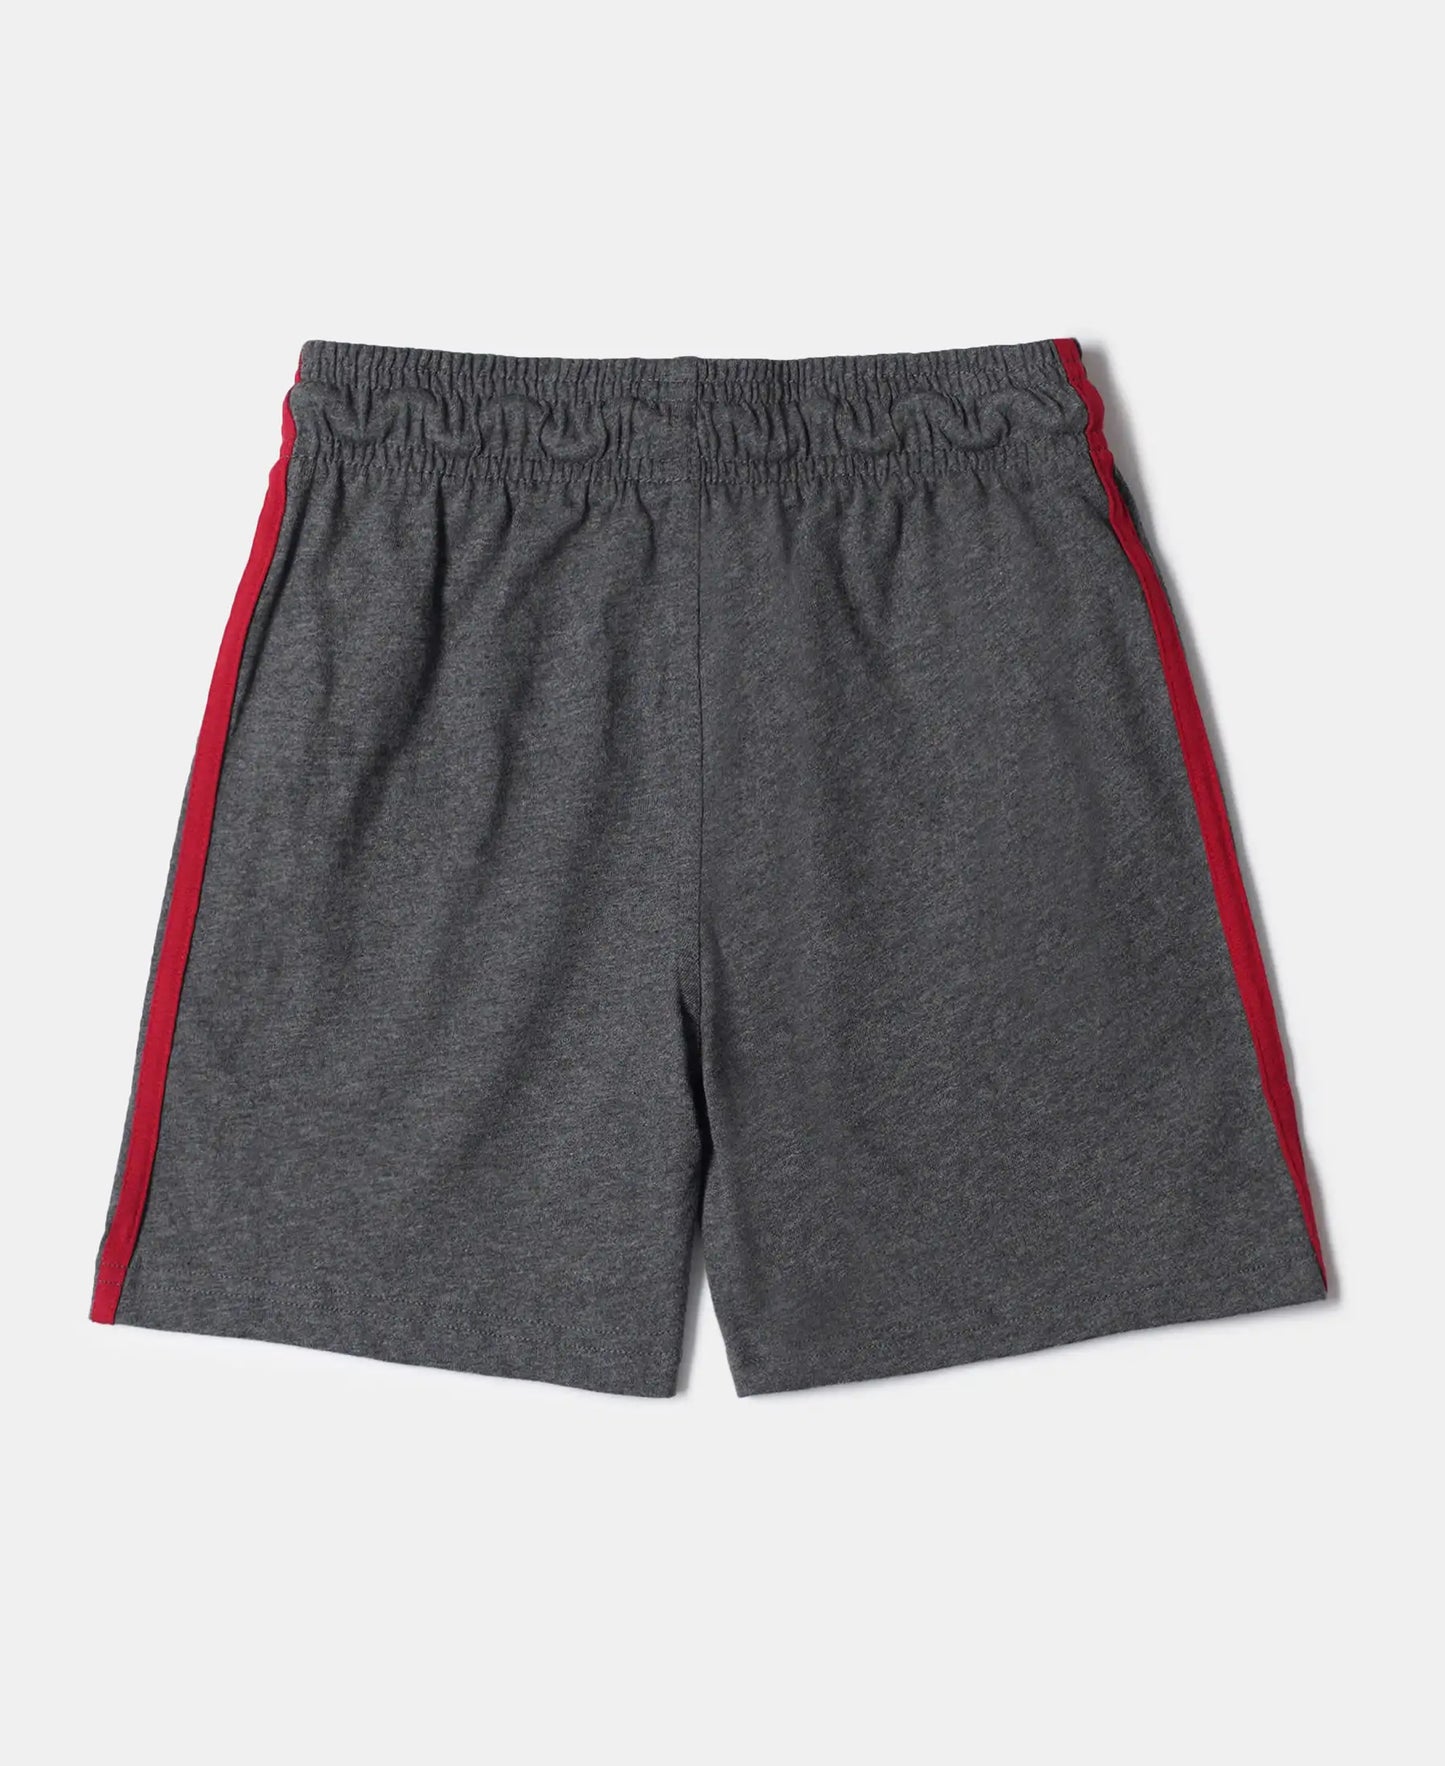 Super Combed Cotton Rich Graphic Printed Shorts with Contrast Side Taping - Charcoal Melange & Shanghai Red-2